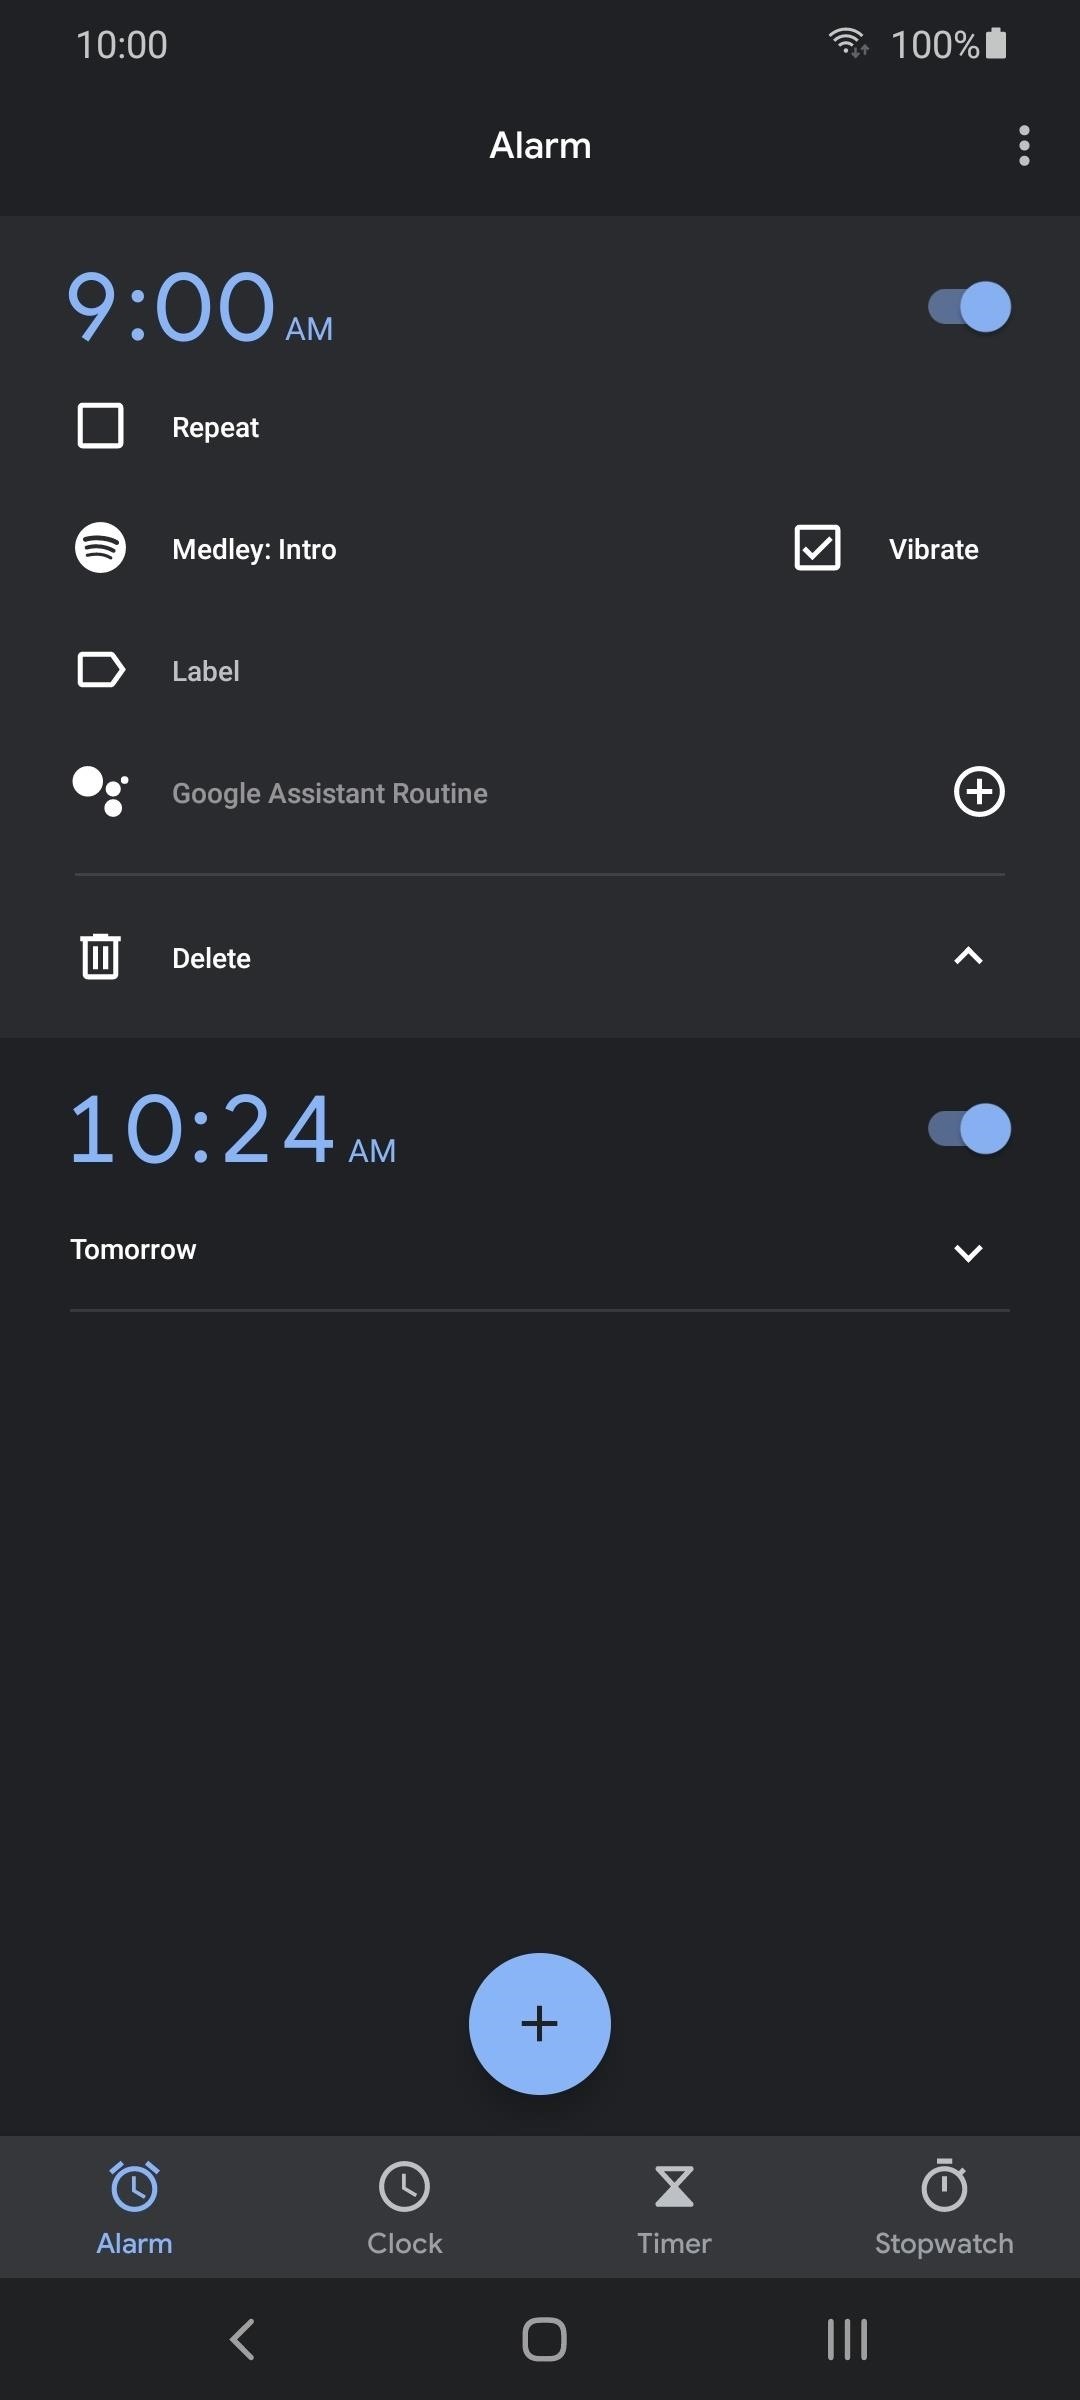 How to Replace Your Alarm with Your Favorite Song or Playlist on Android